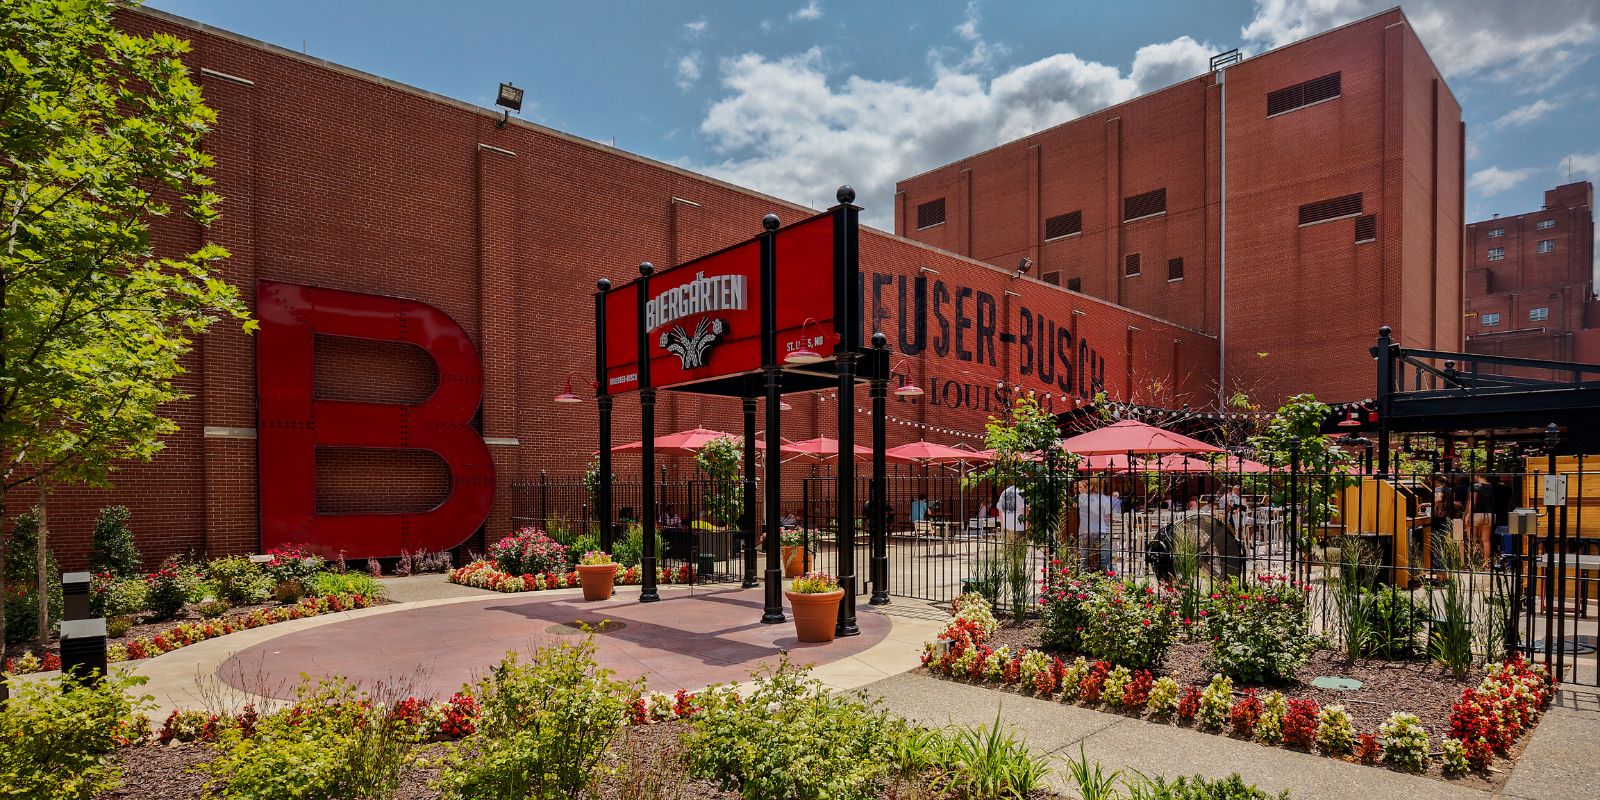 The Anheuser-Busch Biergarten is a beautiful place to drink in St. Louis.